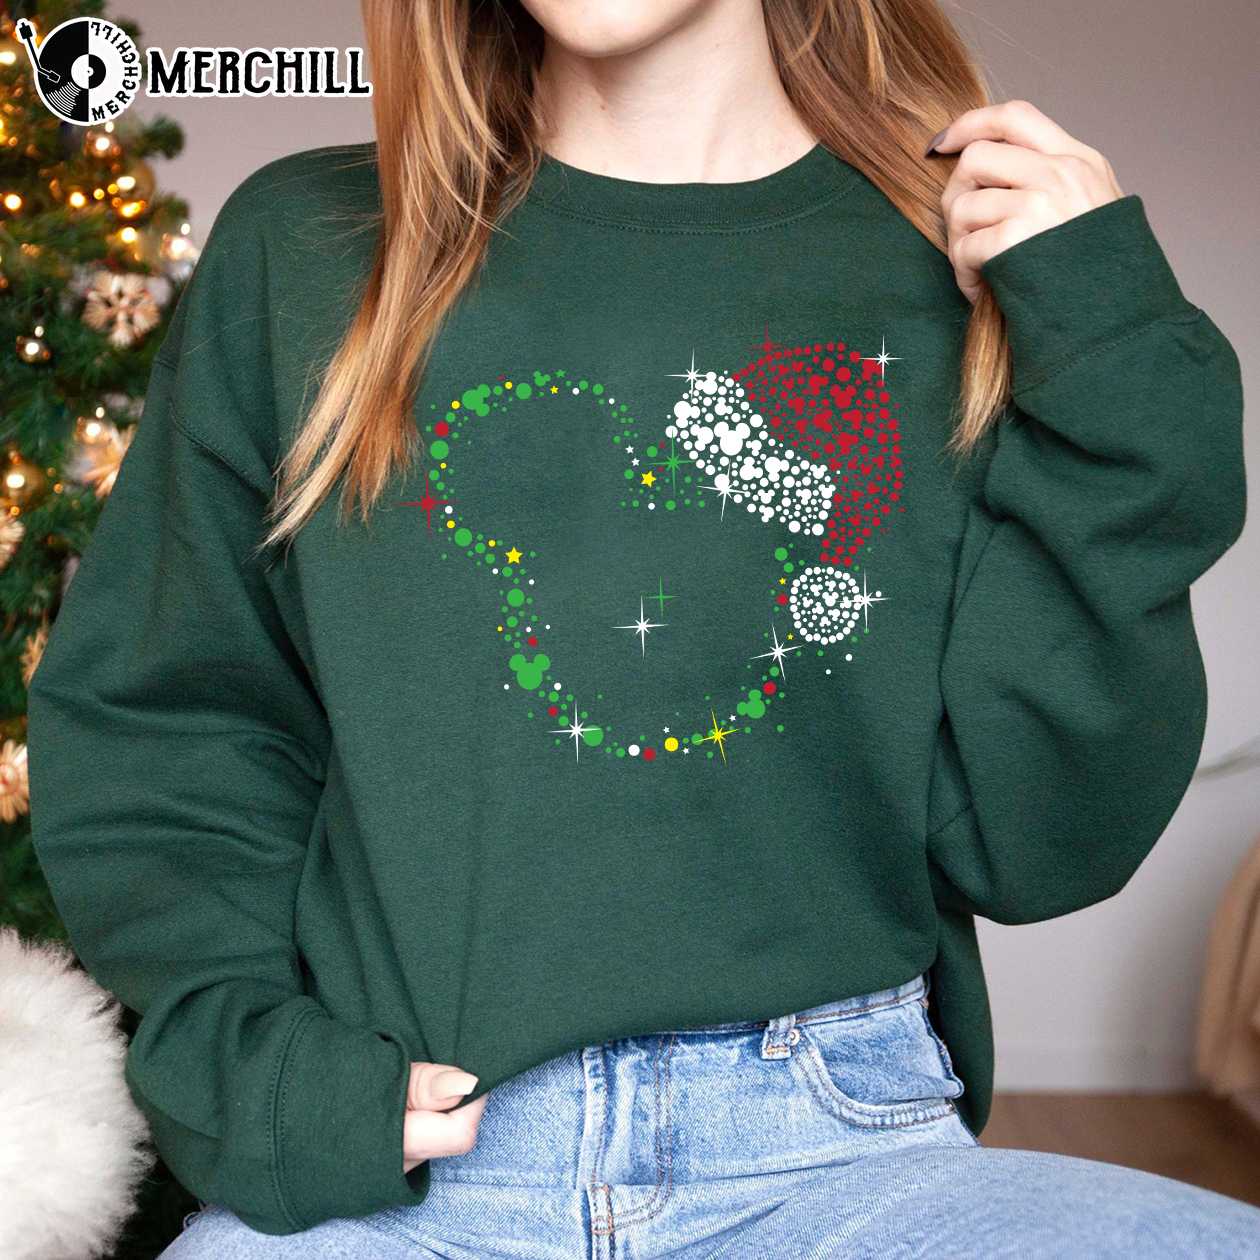 https://images.merchill.com/wp-content/uploads/2022/11/Santa-Mickey-Shirt-Mickey-Mouse-Christmas-Shirt-Womens-Gifts-for-Disney-Lovers.jpg